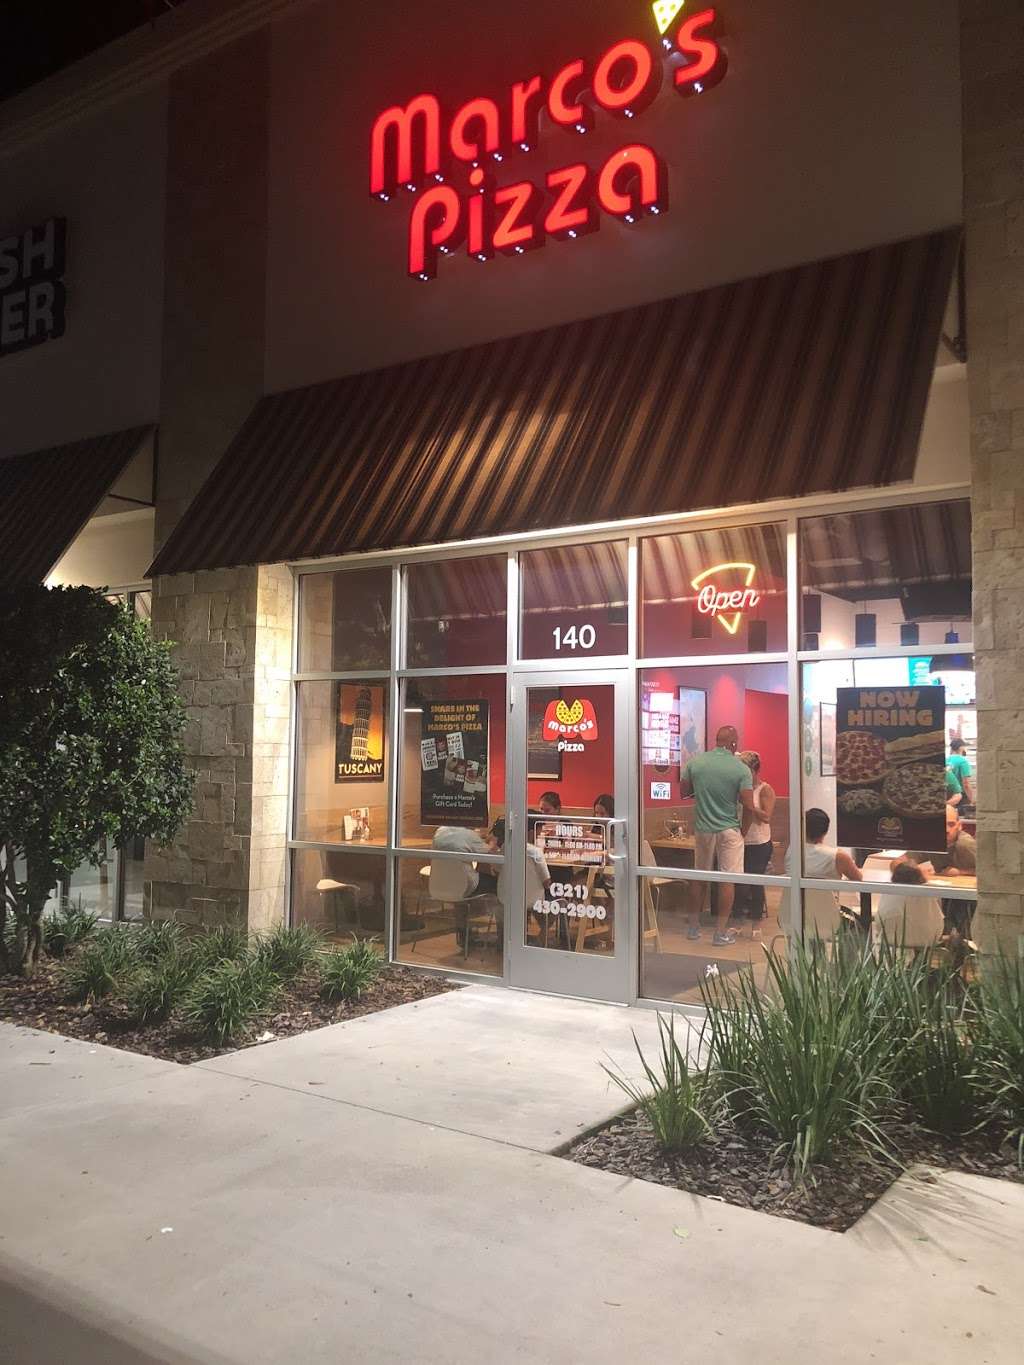 Marcos Pizza | 12701 Narcoossee Rd, Orlando, FL 32832 | Phone: (321) 430-2900